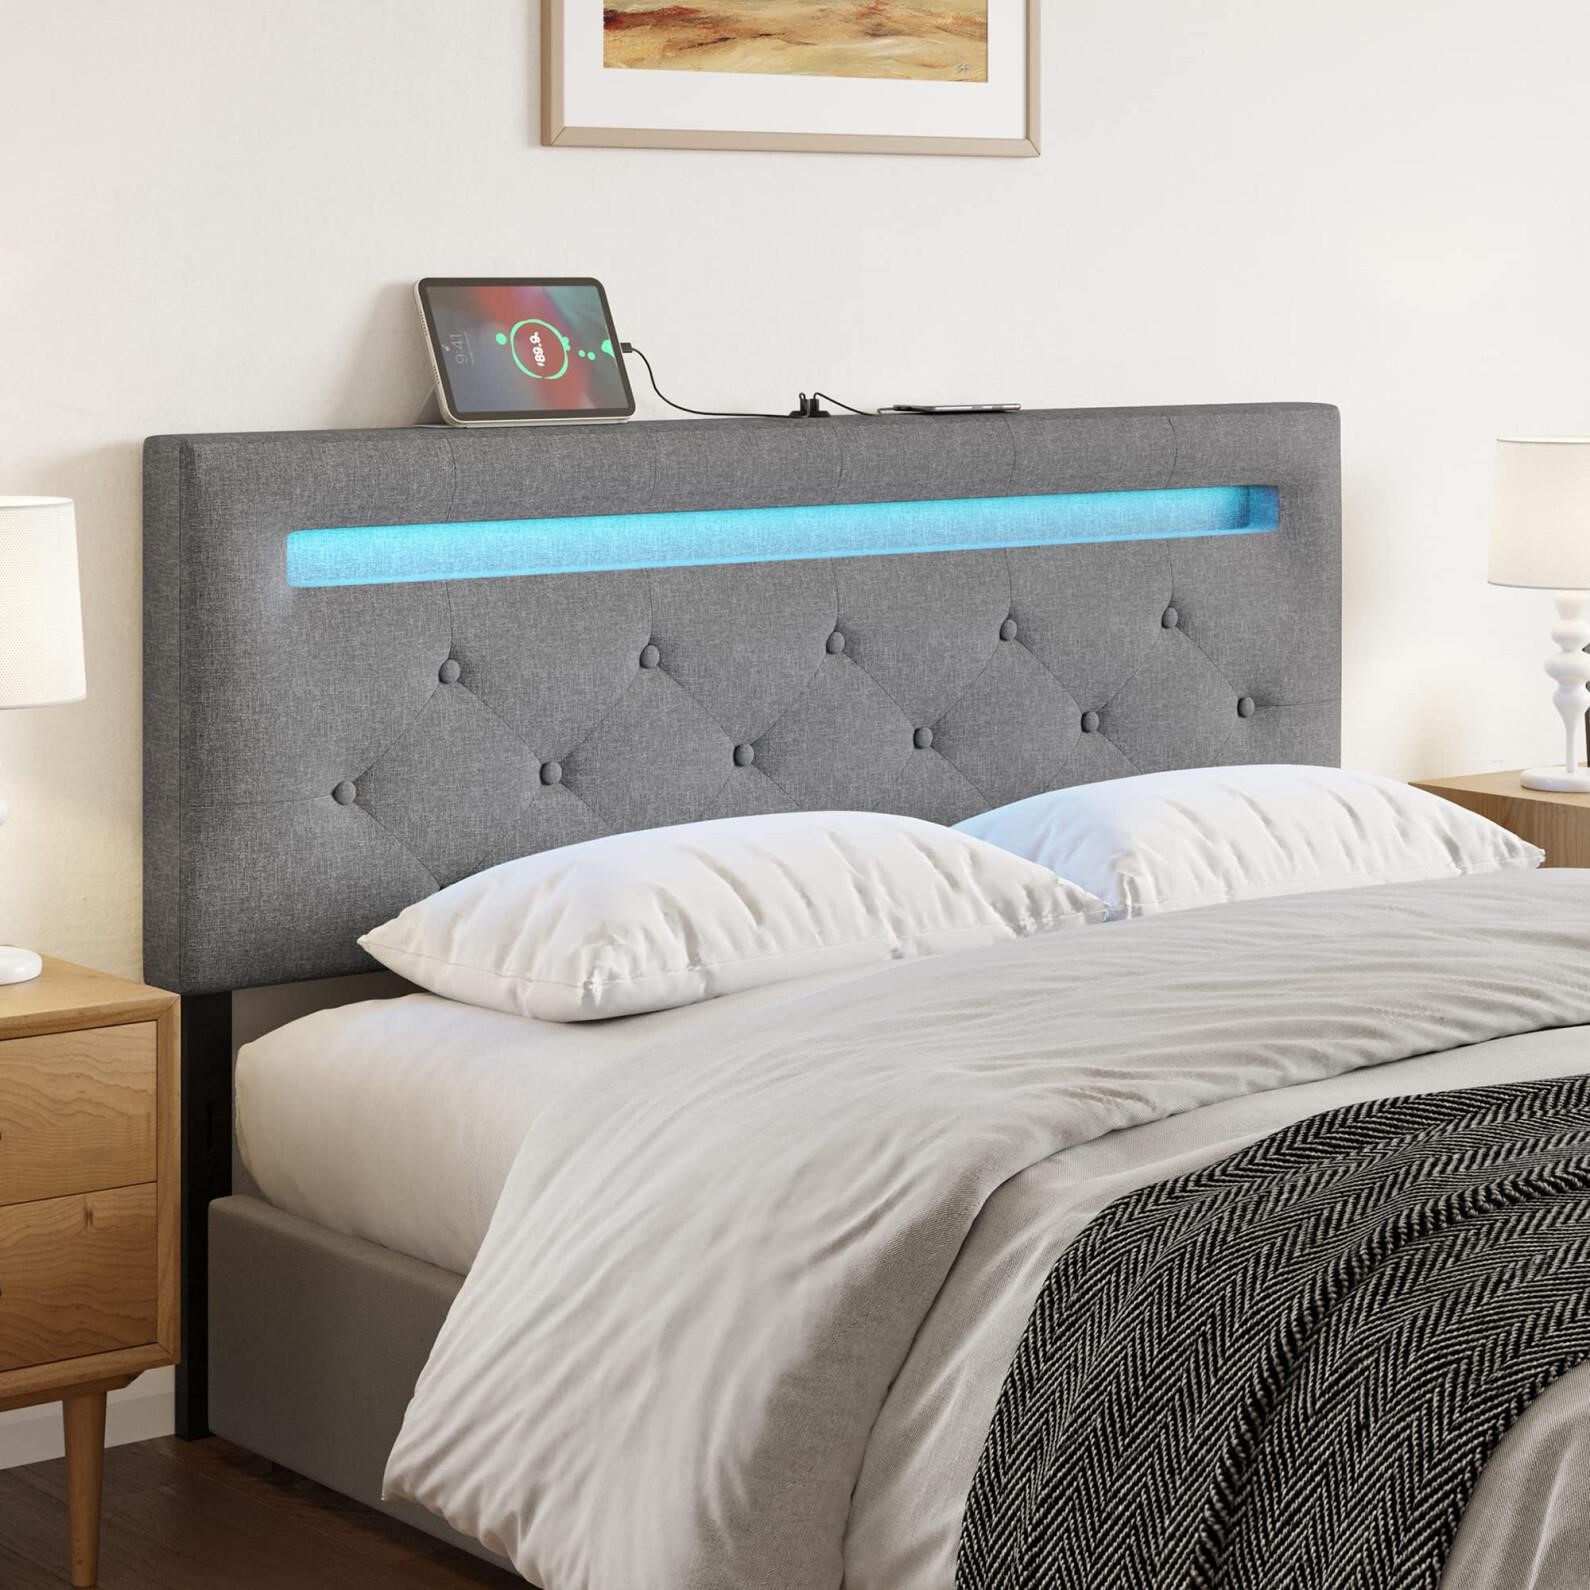 HAUSOURCE Headboards for Queen Size Bed with LED L